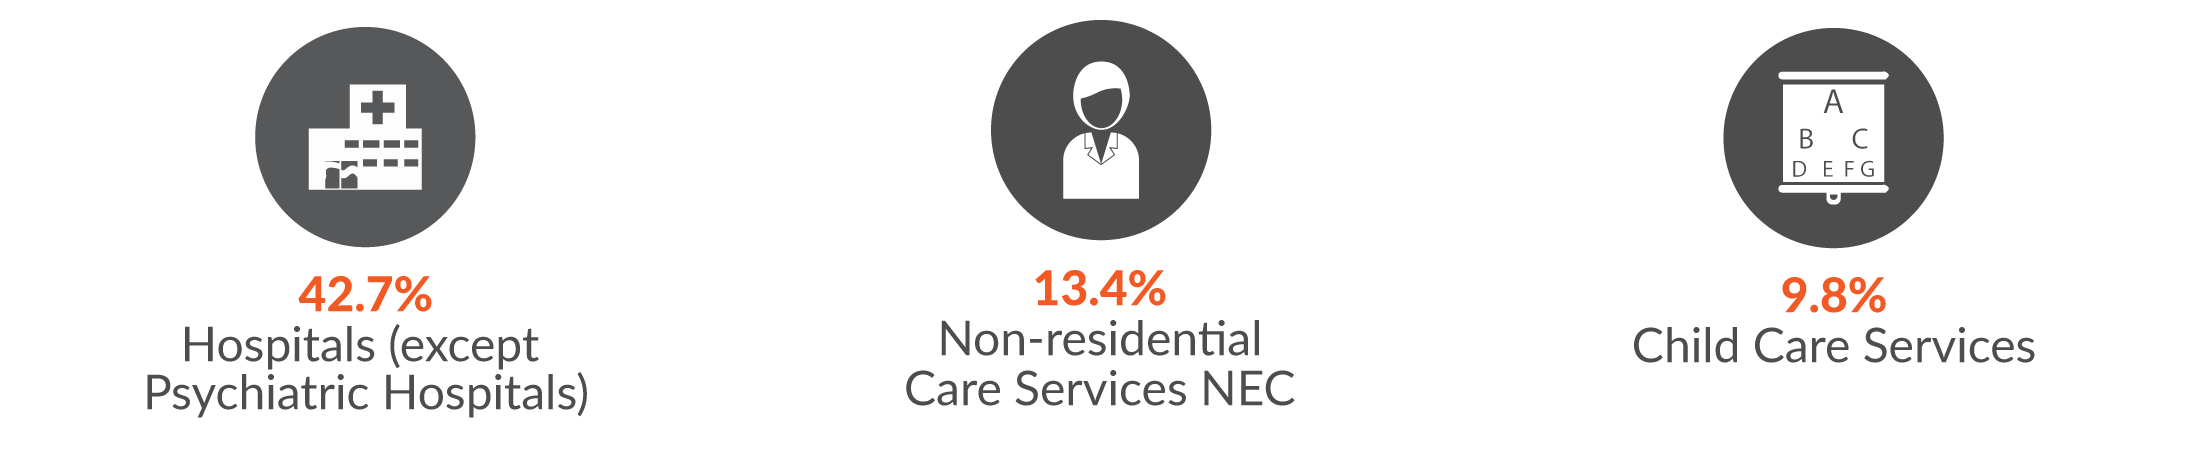 This infographic shows 42.7% of the health and community services serious injury claims were in Hospitals, 13.4% in Non-residential Care Services NEC and 9.8% in Child Care Services.